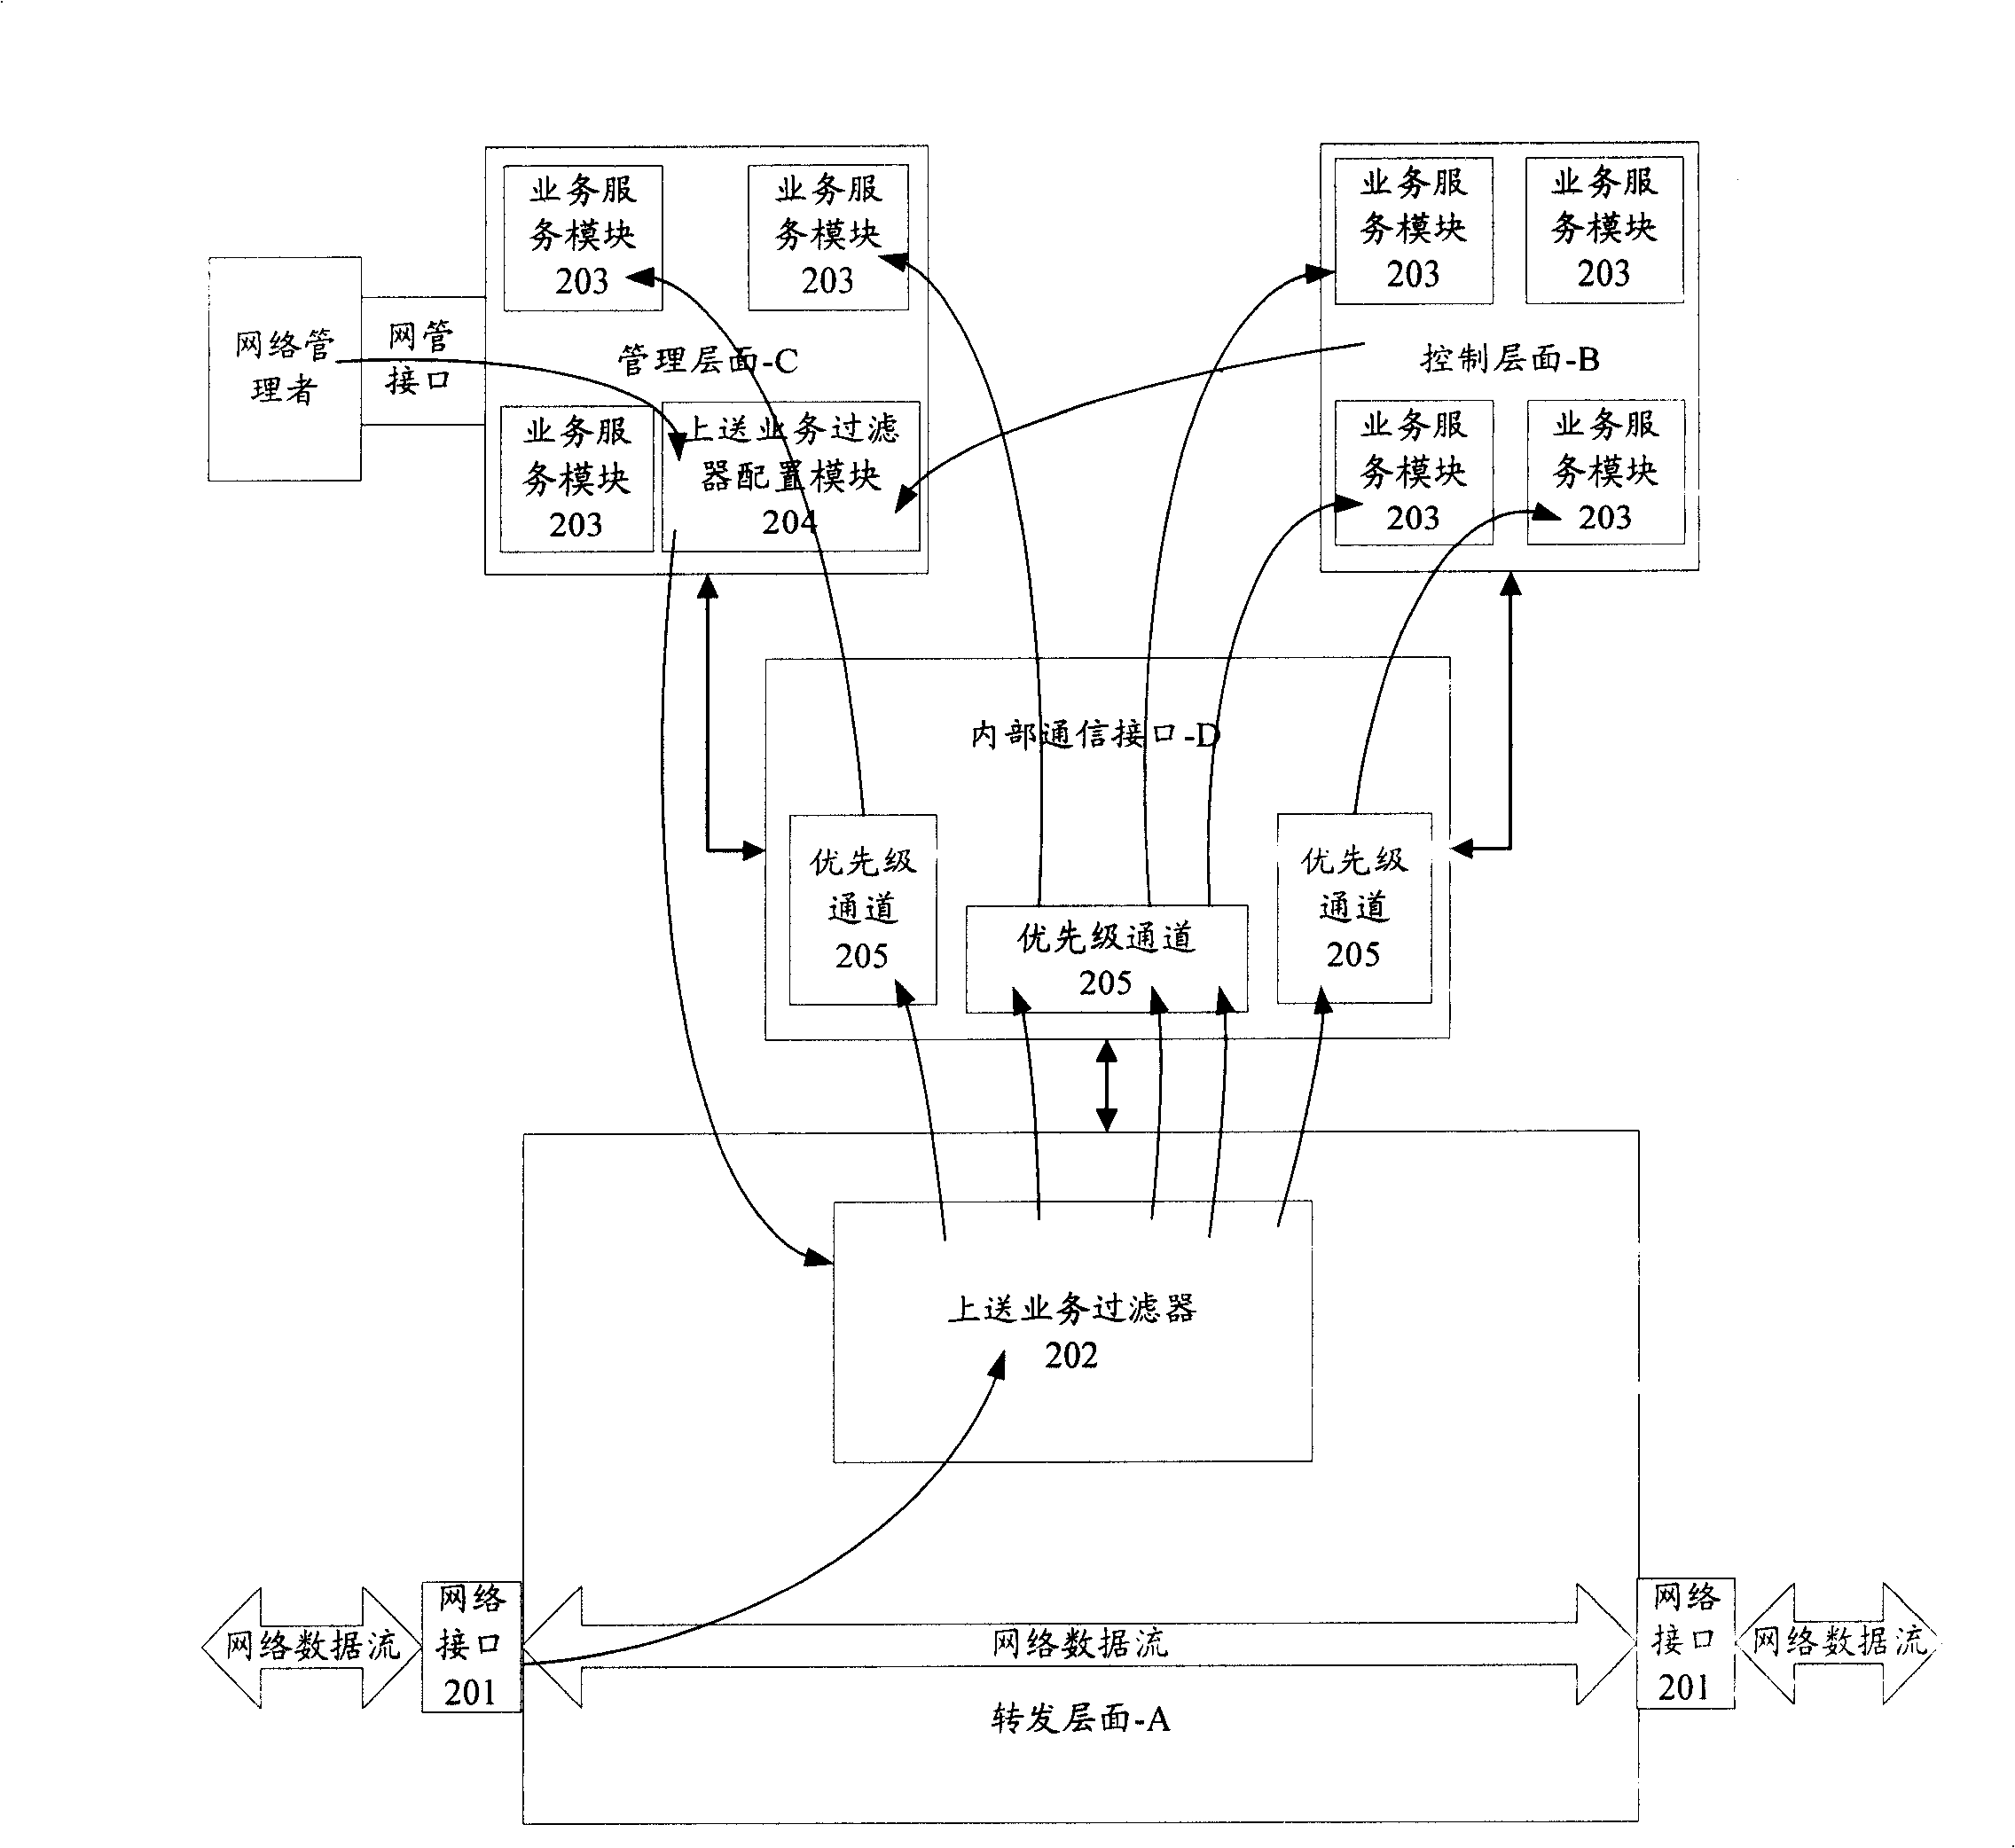 Method and apparatus for defending network attack